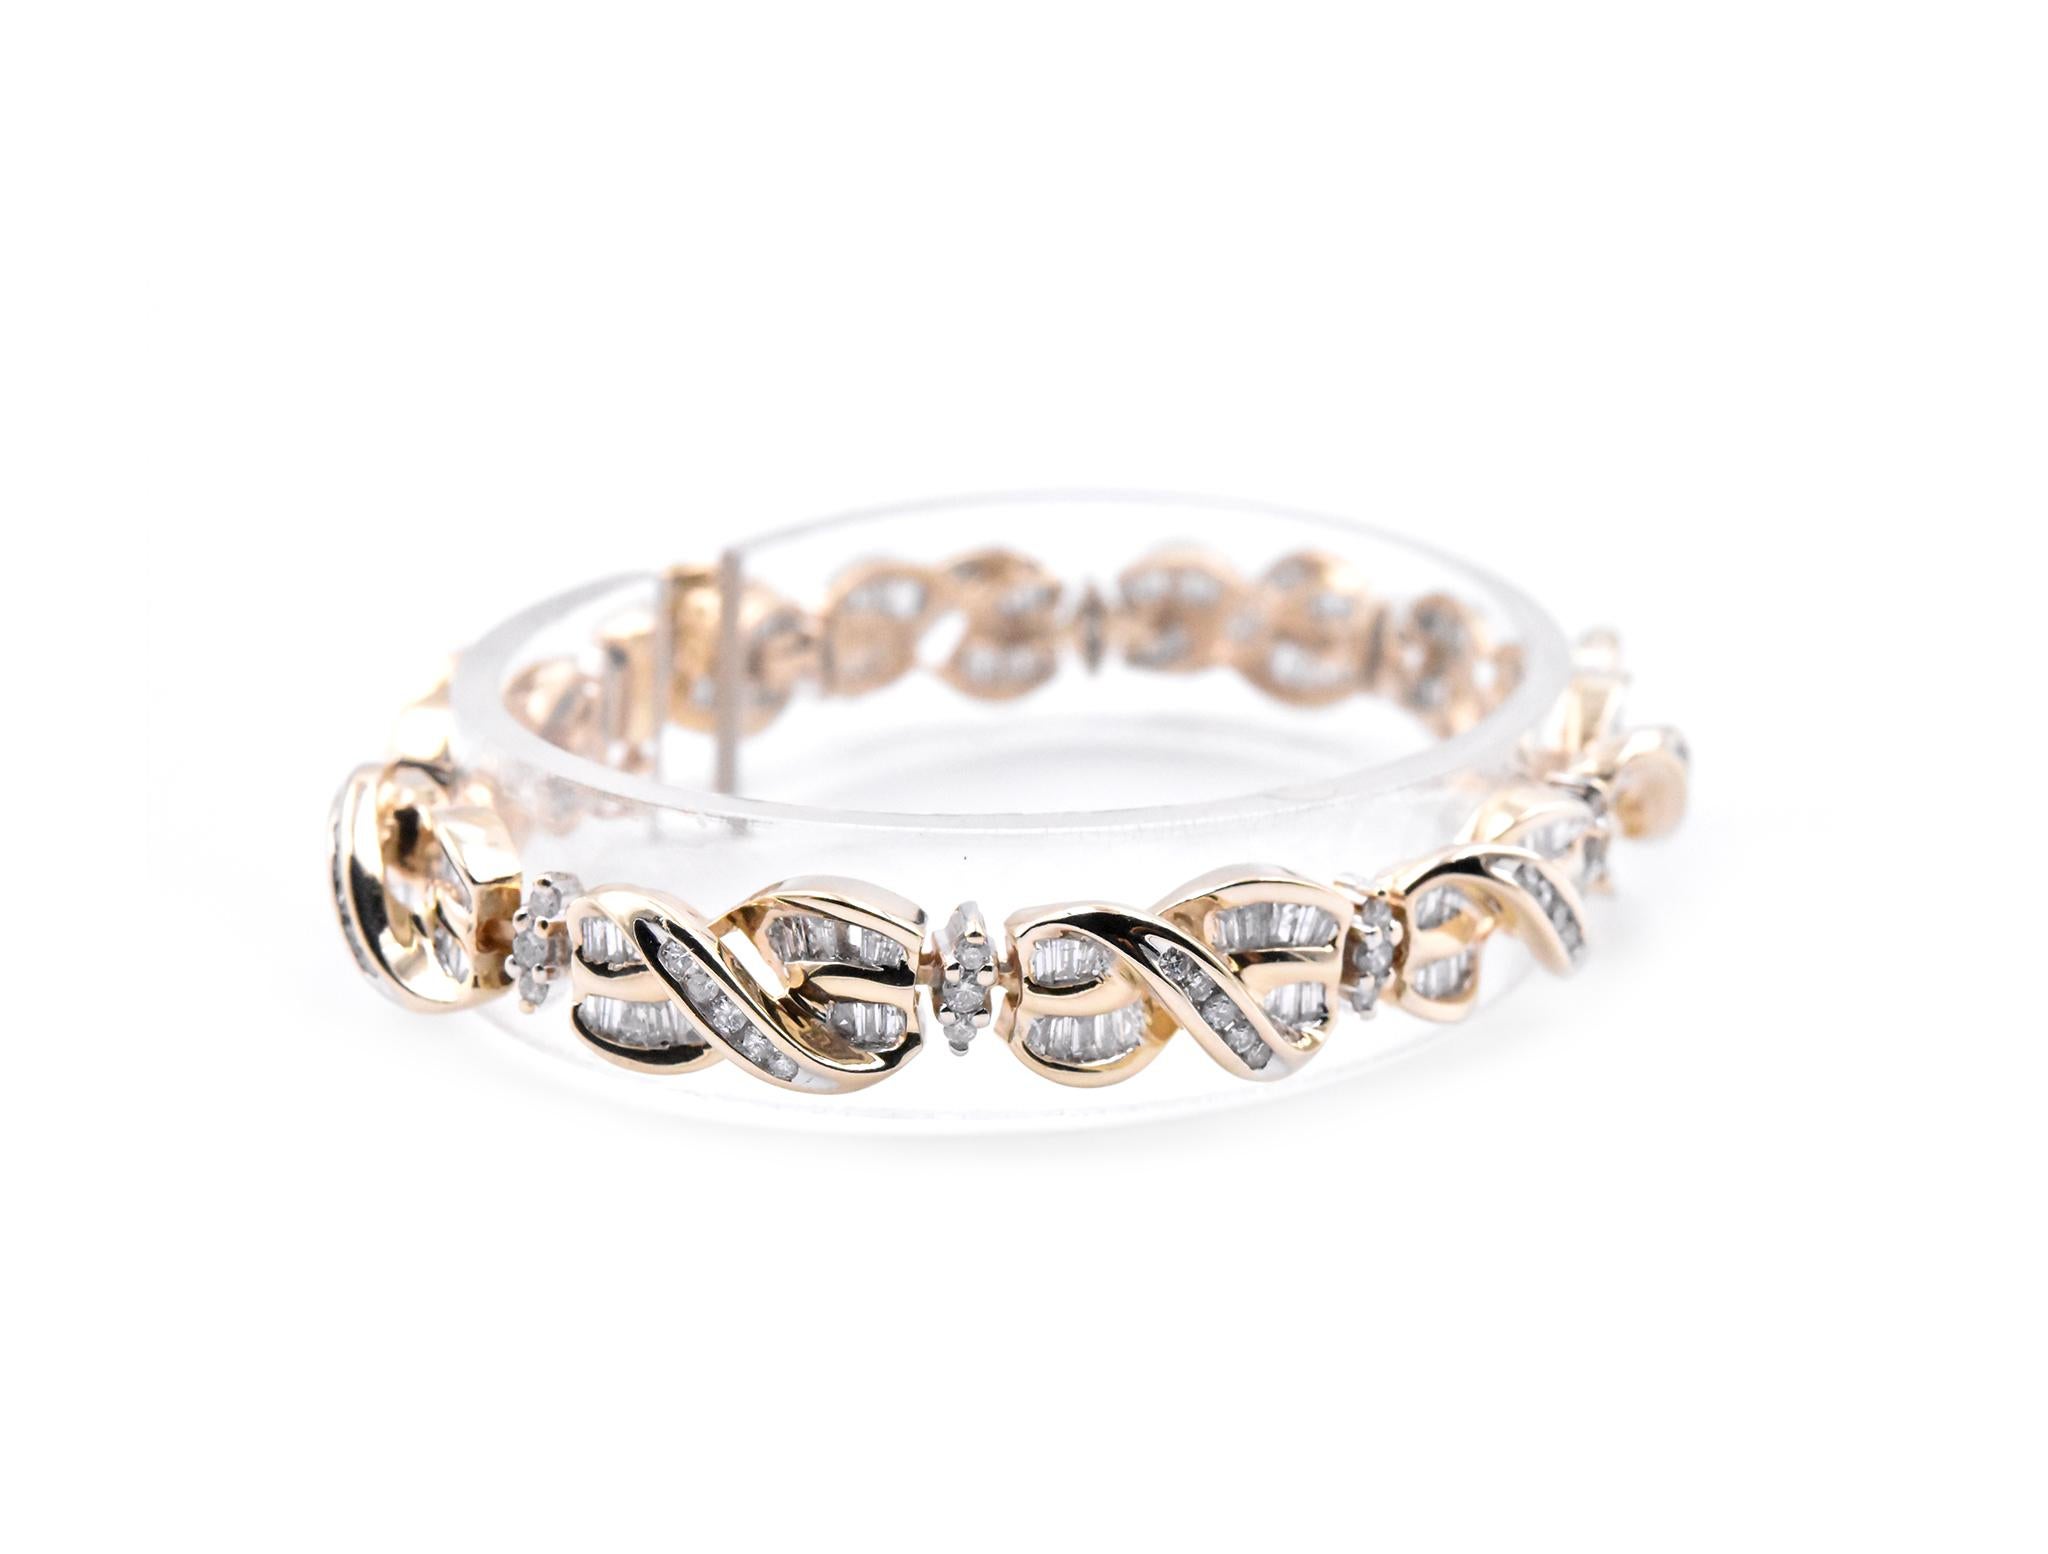 Designer: custom design
Material: 14k yellow gold
Diamonds: 3.50cttw
Color: G-I
Clarity: SI2-I1
Dimensions: bracelet measures 7-inches long and 8.41mm in width
Weight: 26.26 grams
